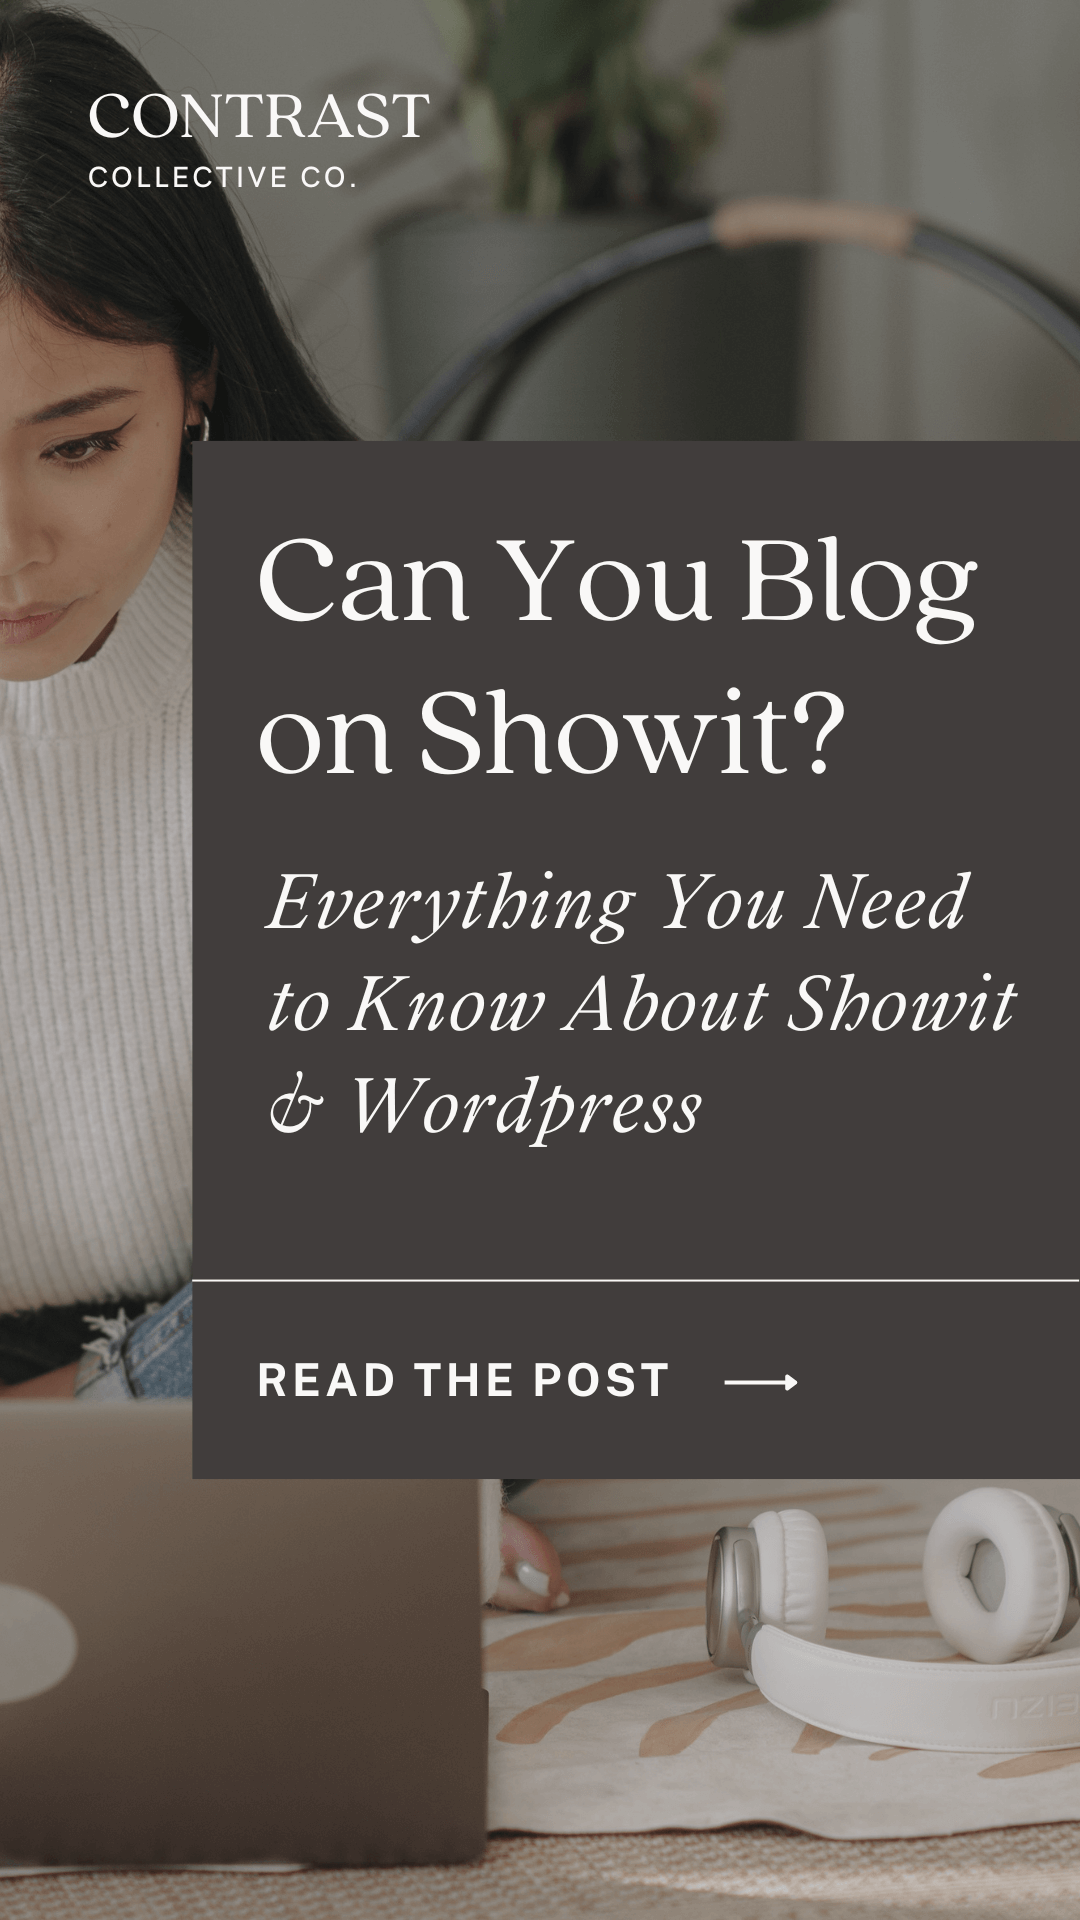 Can you blog on Showit? Read this post on everything you need to know about Showit and WordPress so you can design a website with ease.